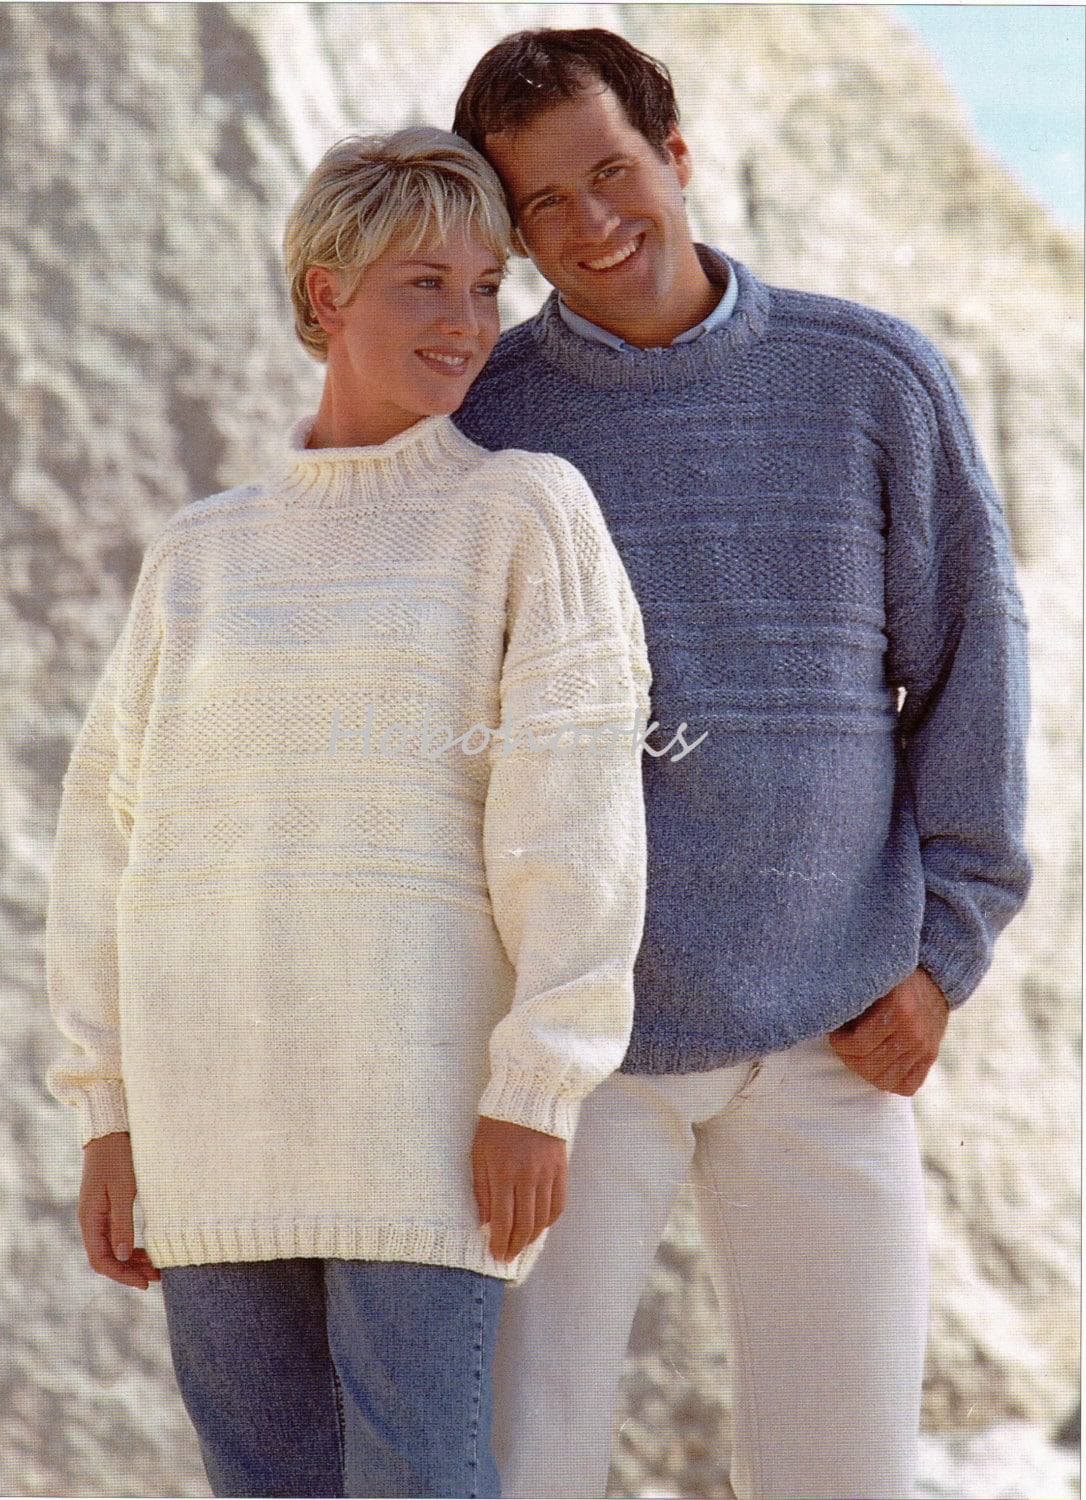 Womens Mens Guernsey Sweater Knitting Pattern Pdf Ladies Cable 